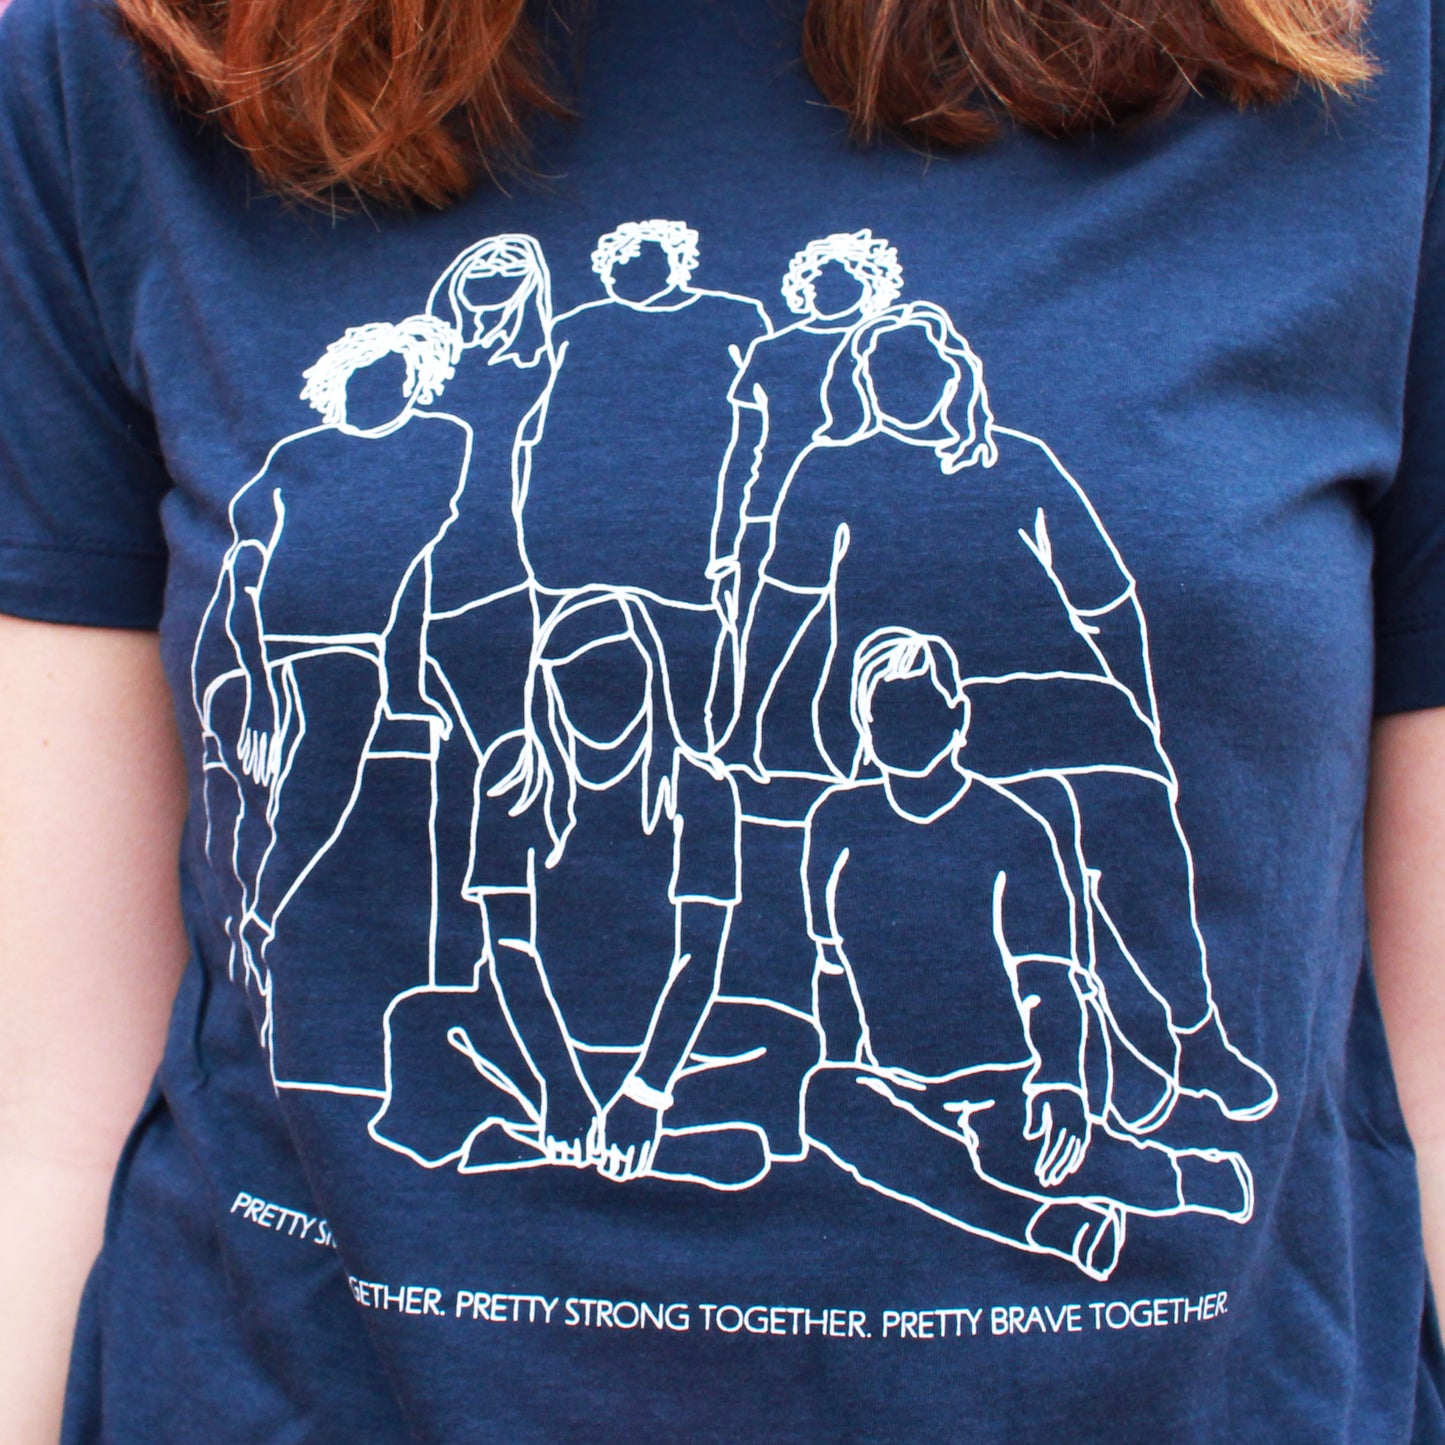 Pretty Project T-Shirt - Together